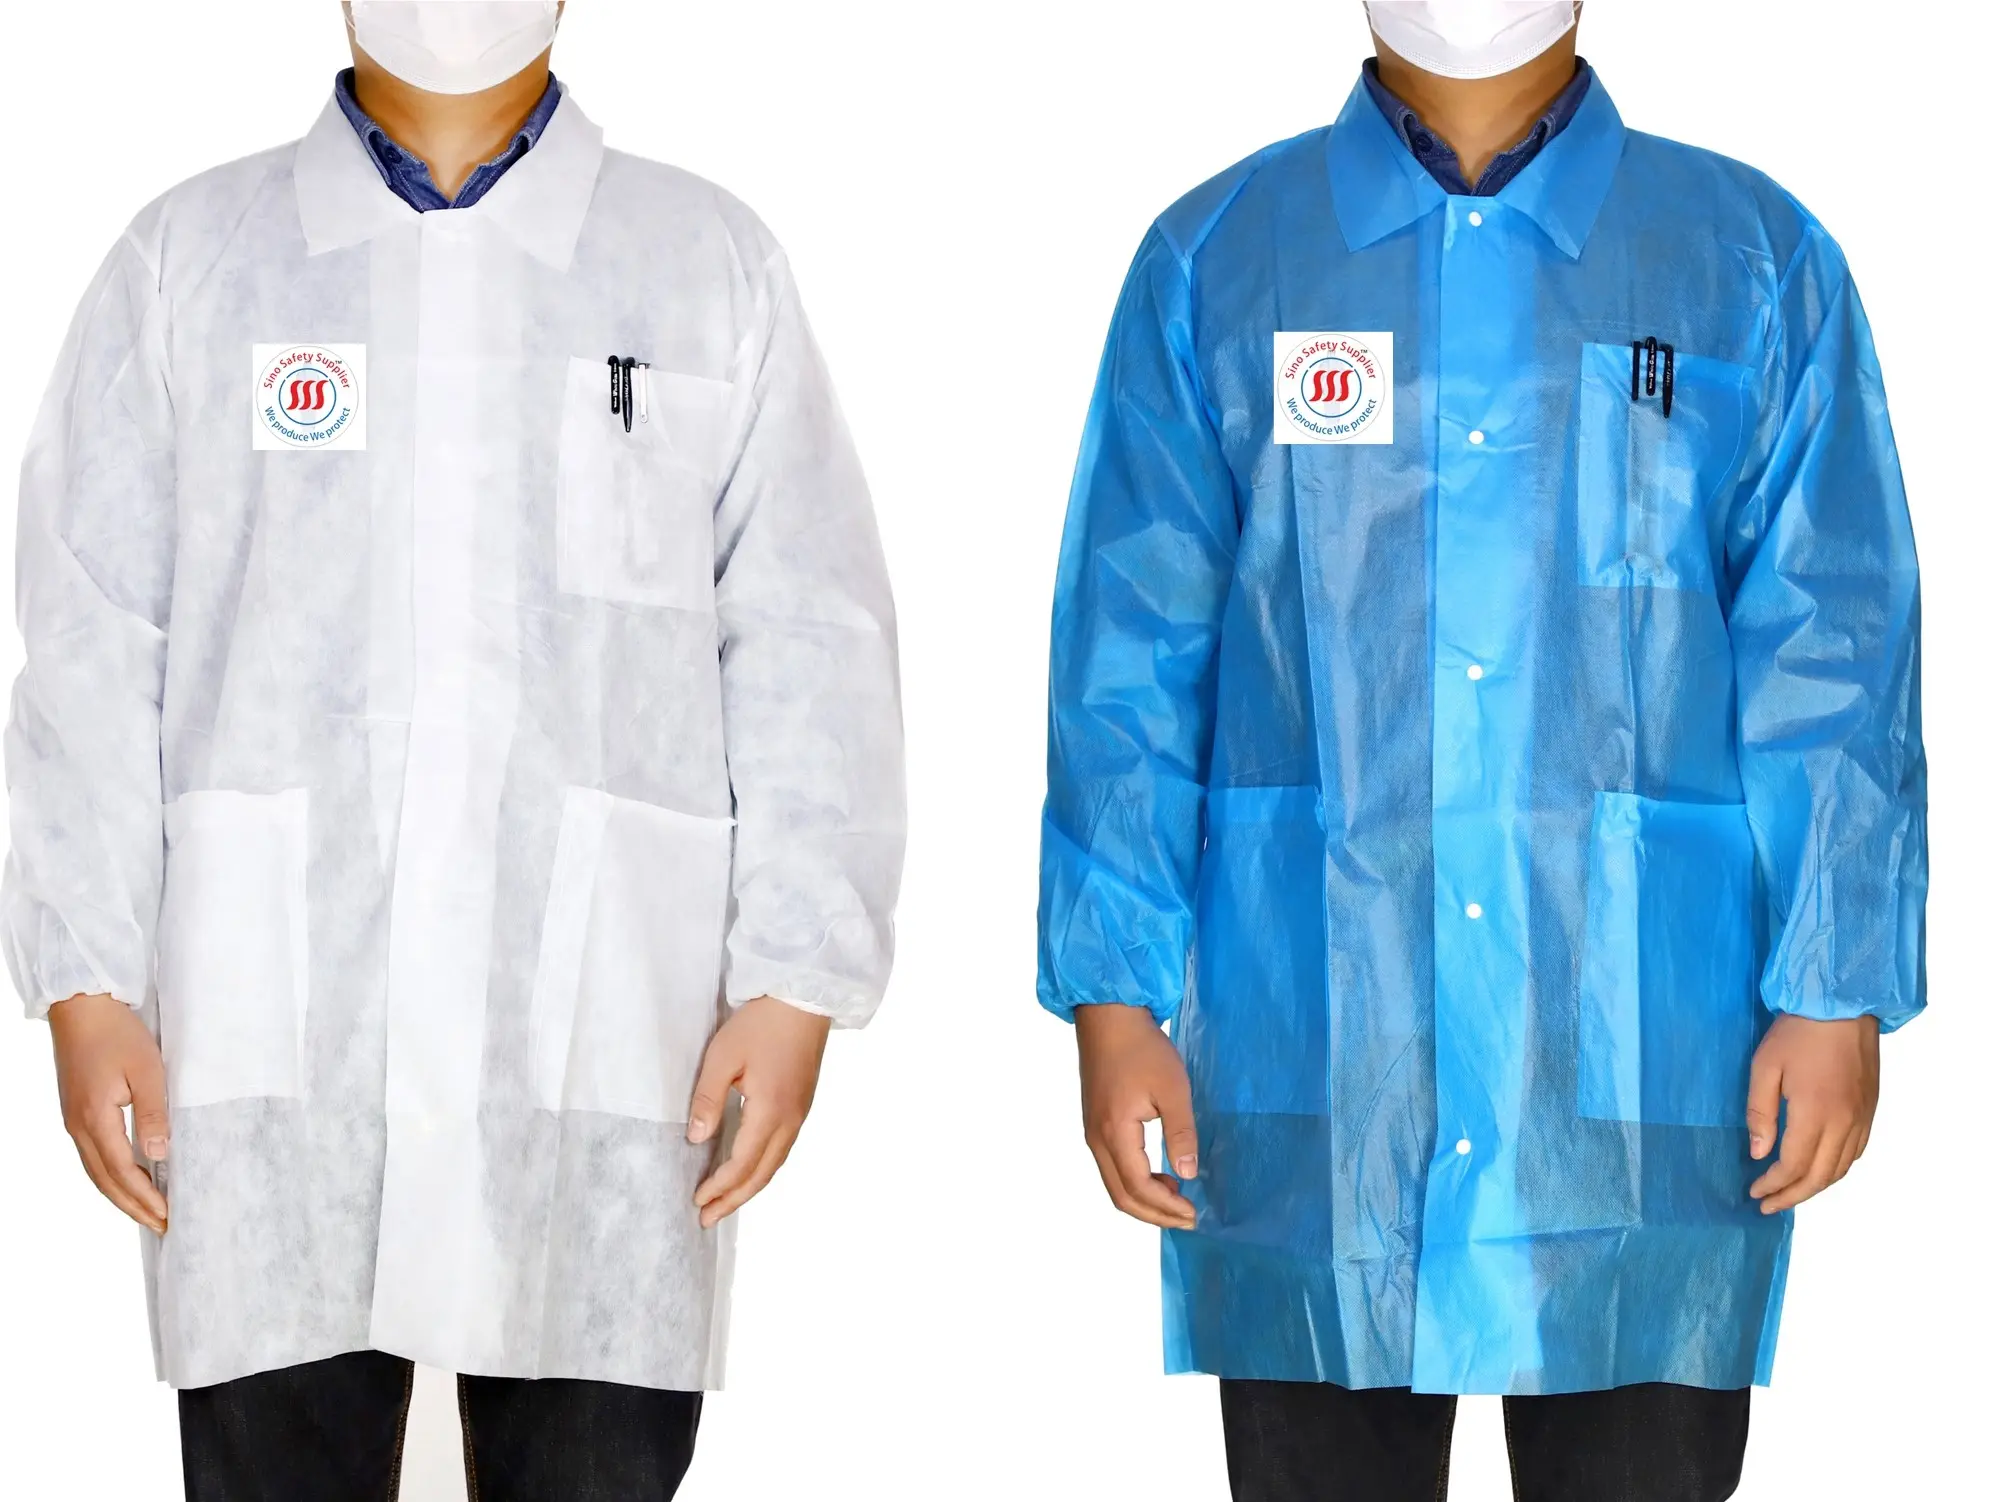 Disposable Protective Cloth Waterproof Breathable Film cheap medical non woven doctor Disposable lab coat